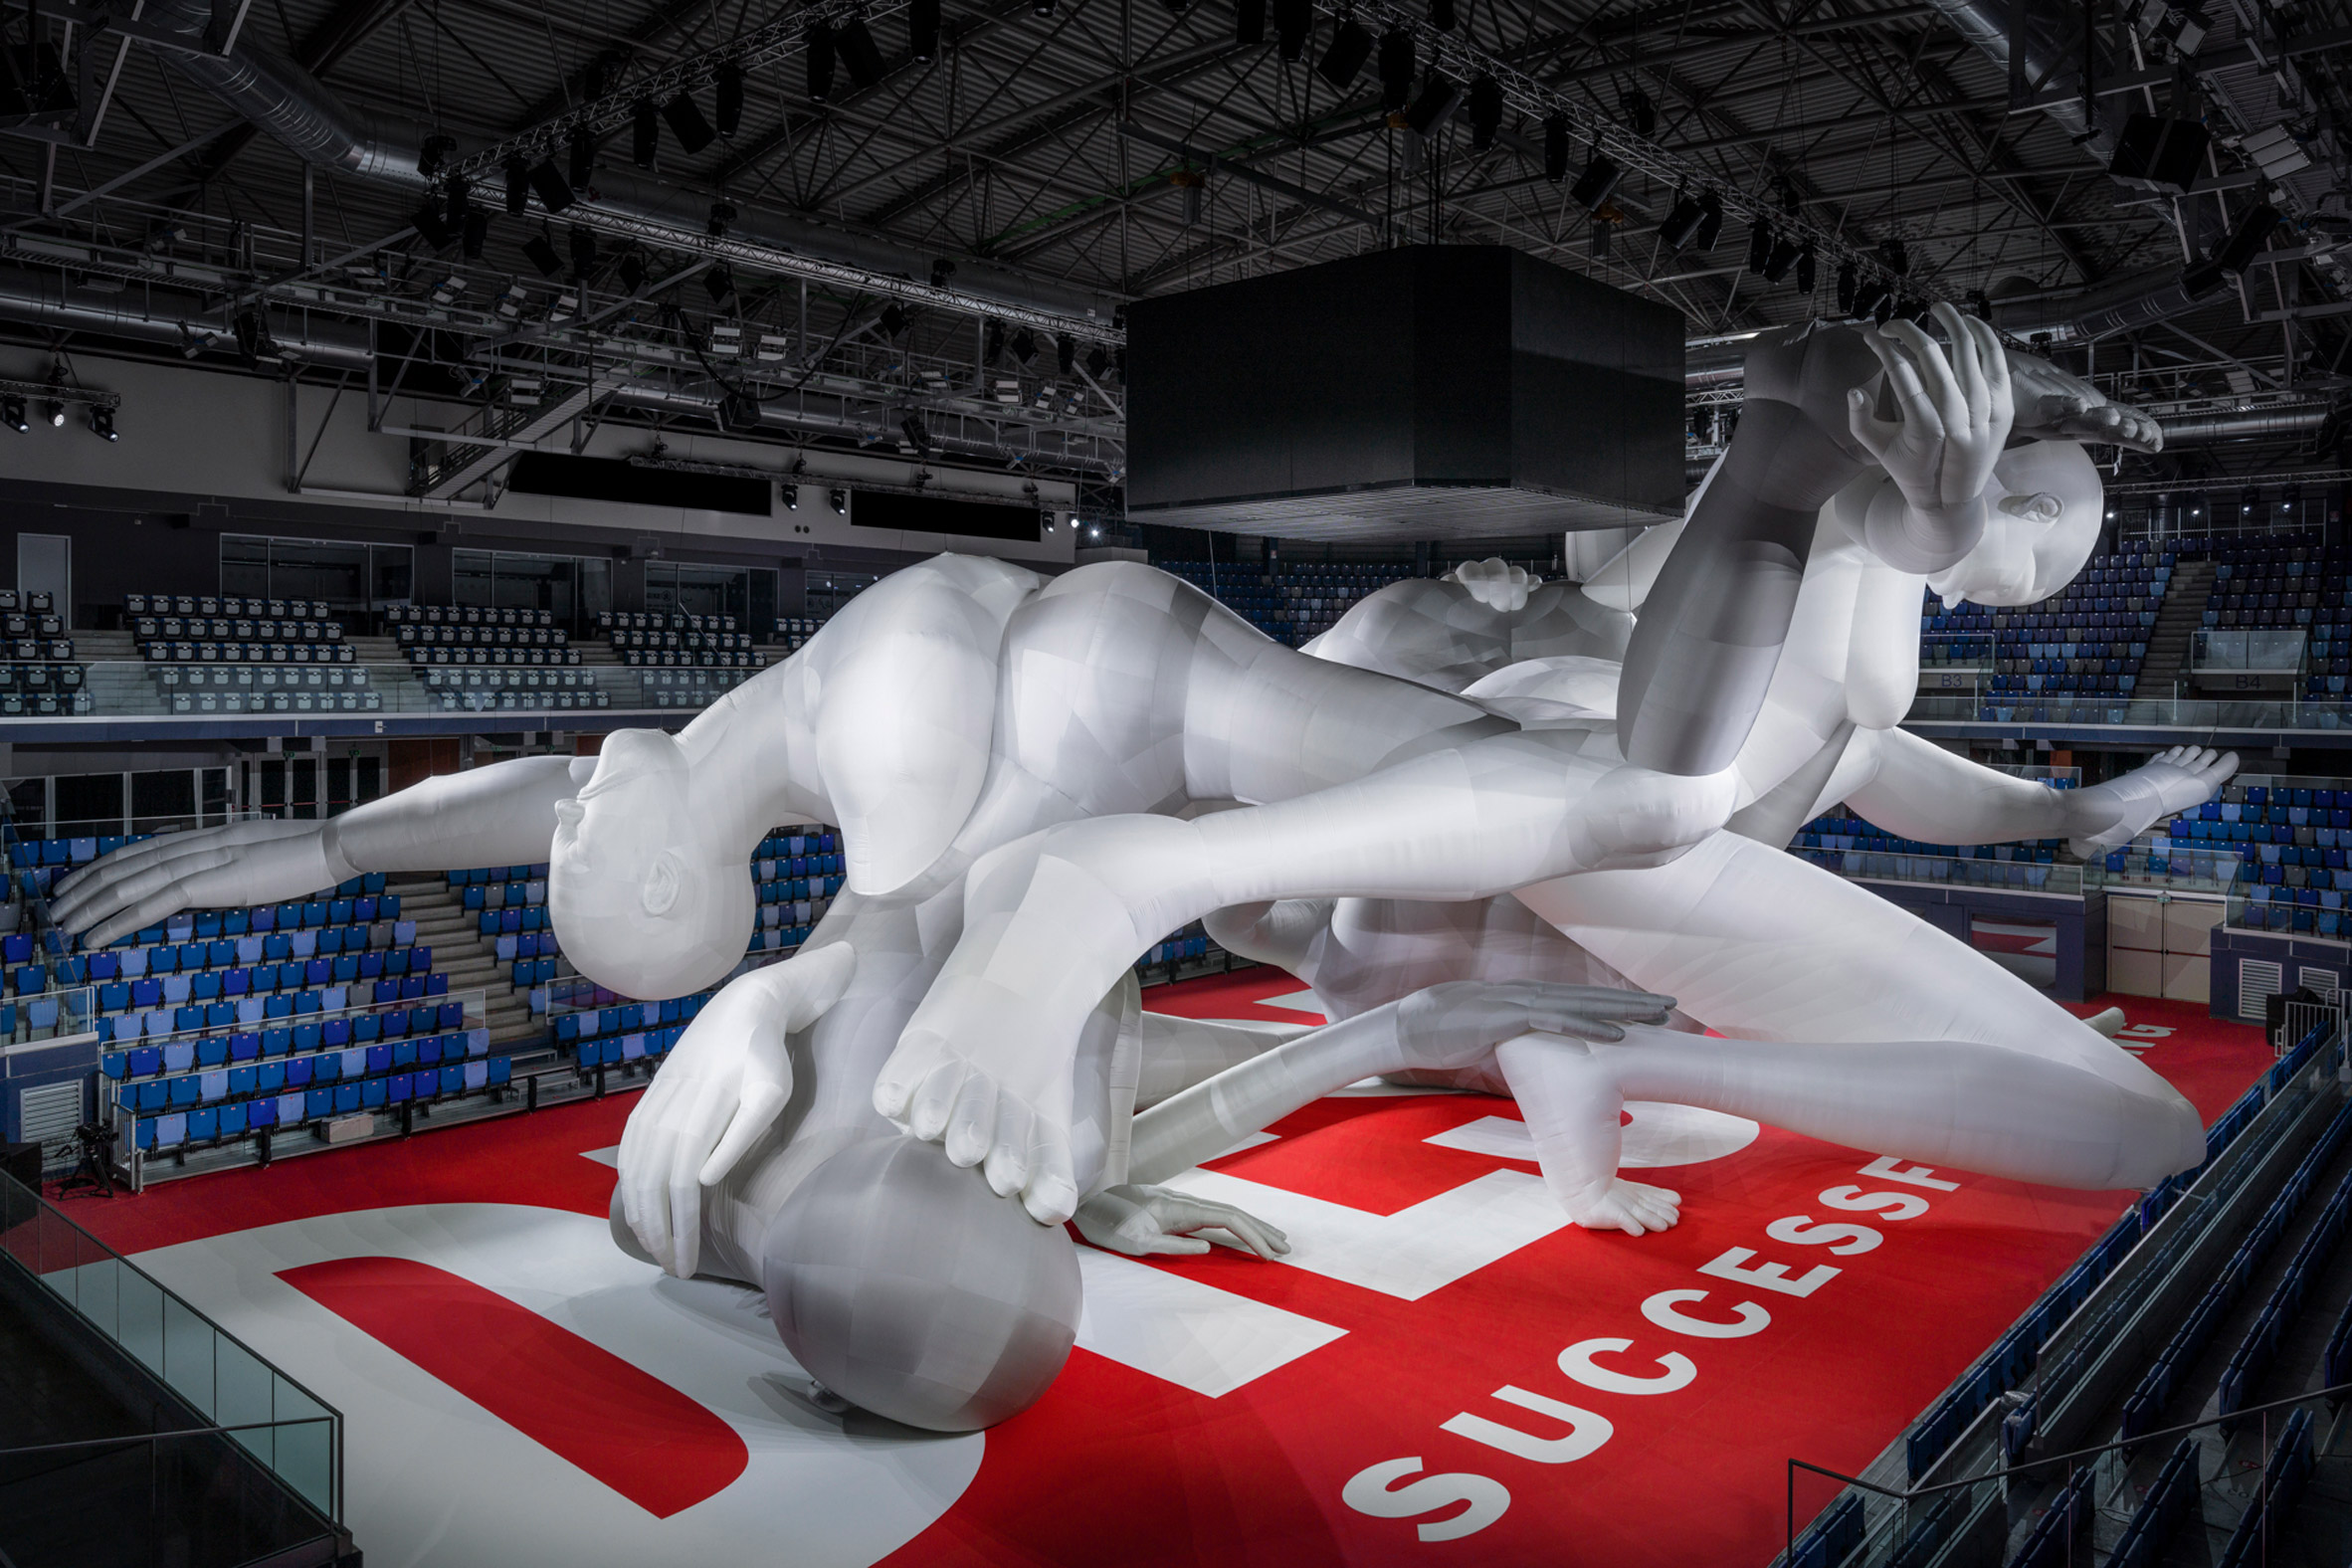 Image of the world's largest inflatable sculpture